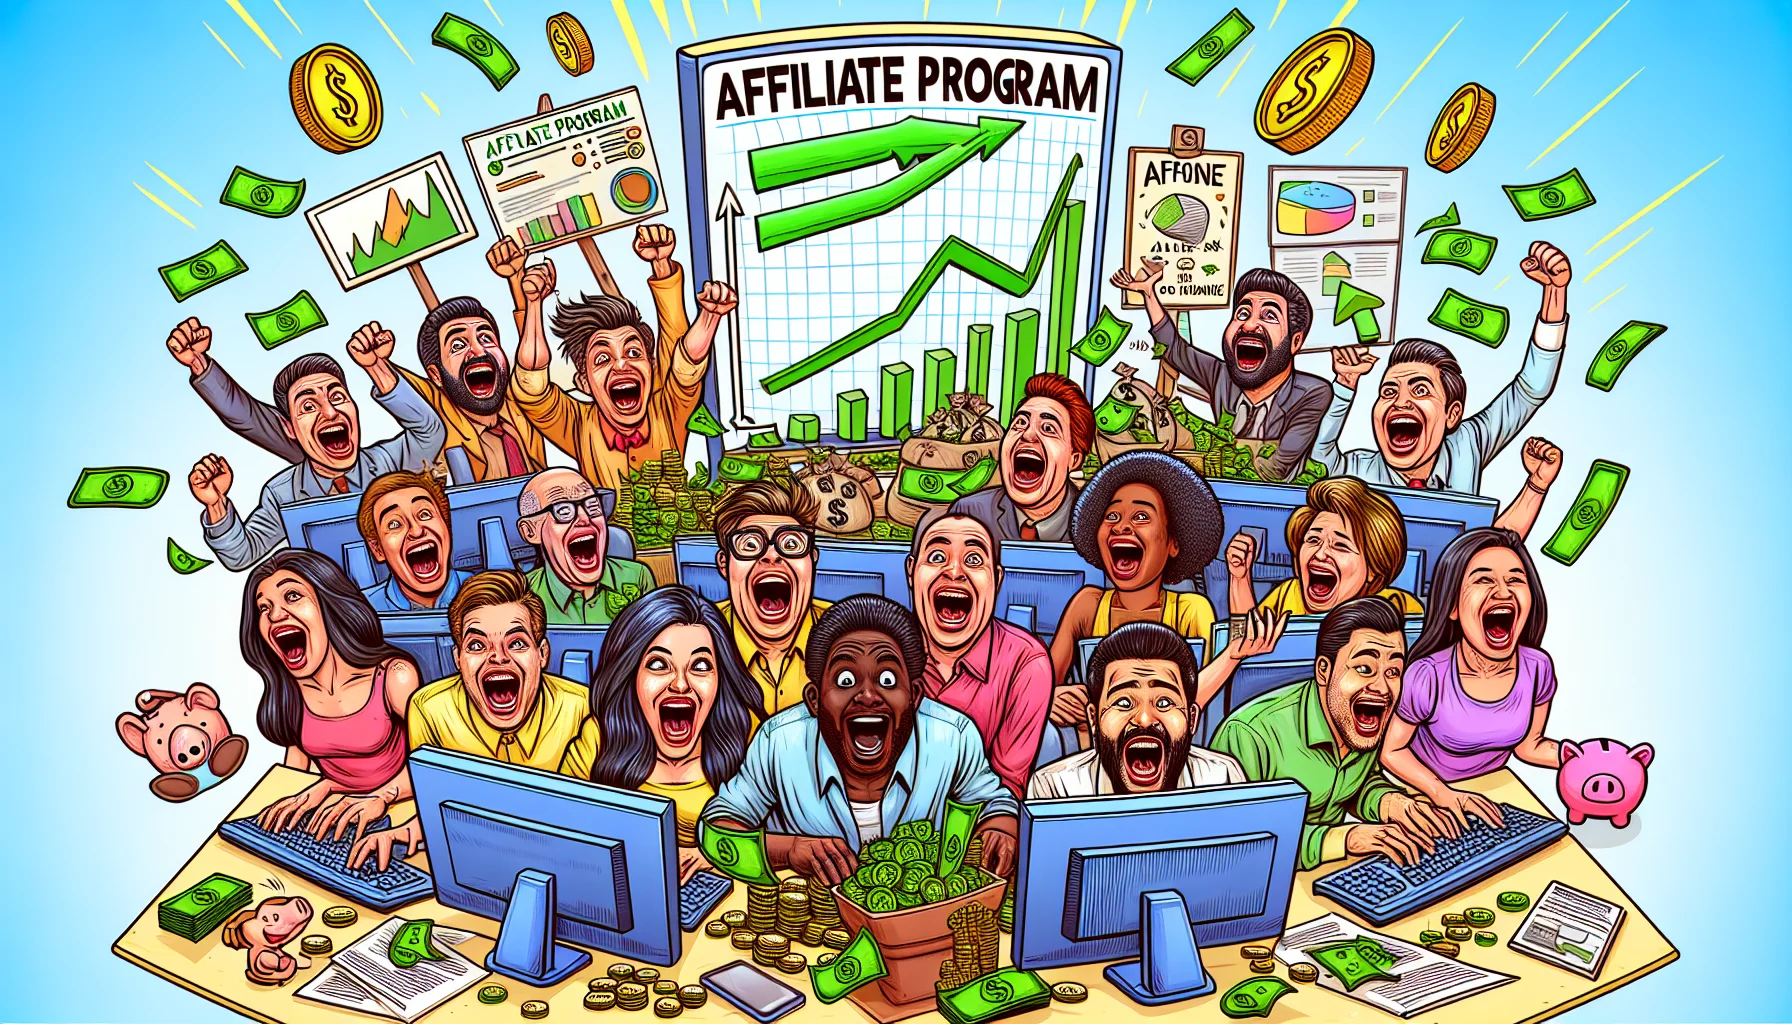 Draw a humorous scene showing an affiliate marketing program in an enthralling context tied to online wealth creation. The image comprises an array of men and women from varied descents like Caucasian, Hispanic, Black, Middle-Eastern, South Asian. They are sitting in front of computers with exaggerated expressions of joy. On their screens are charts/graphs indicating rising profits in vibrant green tones. There is a signboard with the words 'Affiliate Program' and dollar signs hovering over the computers, depicting the concept of earning online. The background is scattered with lighthearted elements like a piggy bank, gold coins, and money stacks.